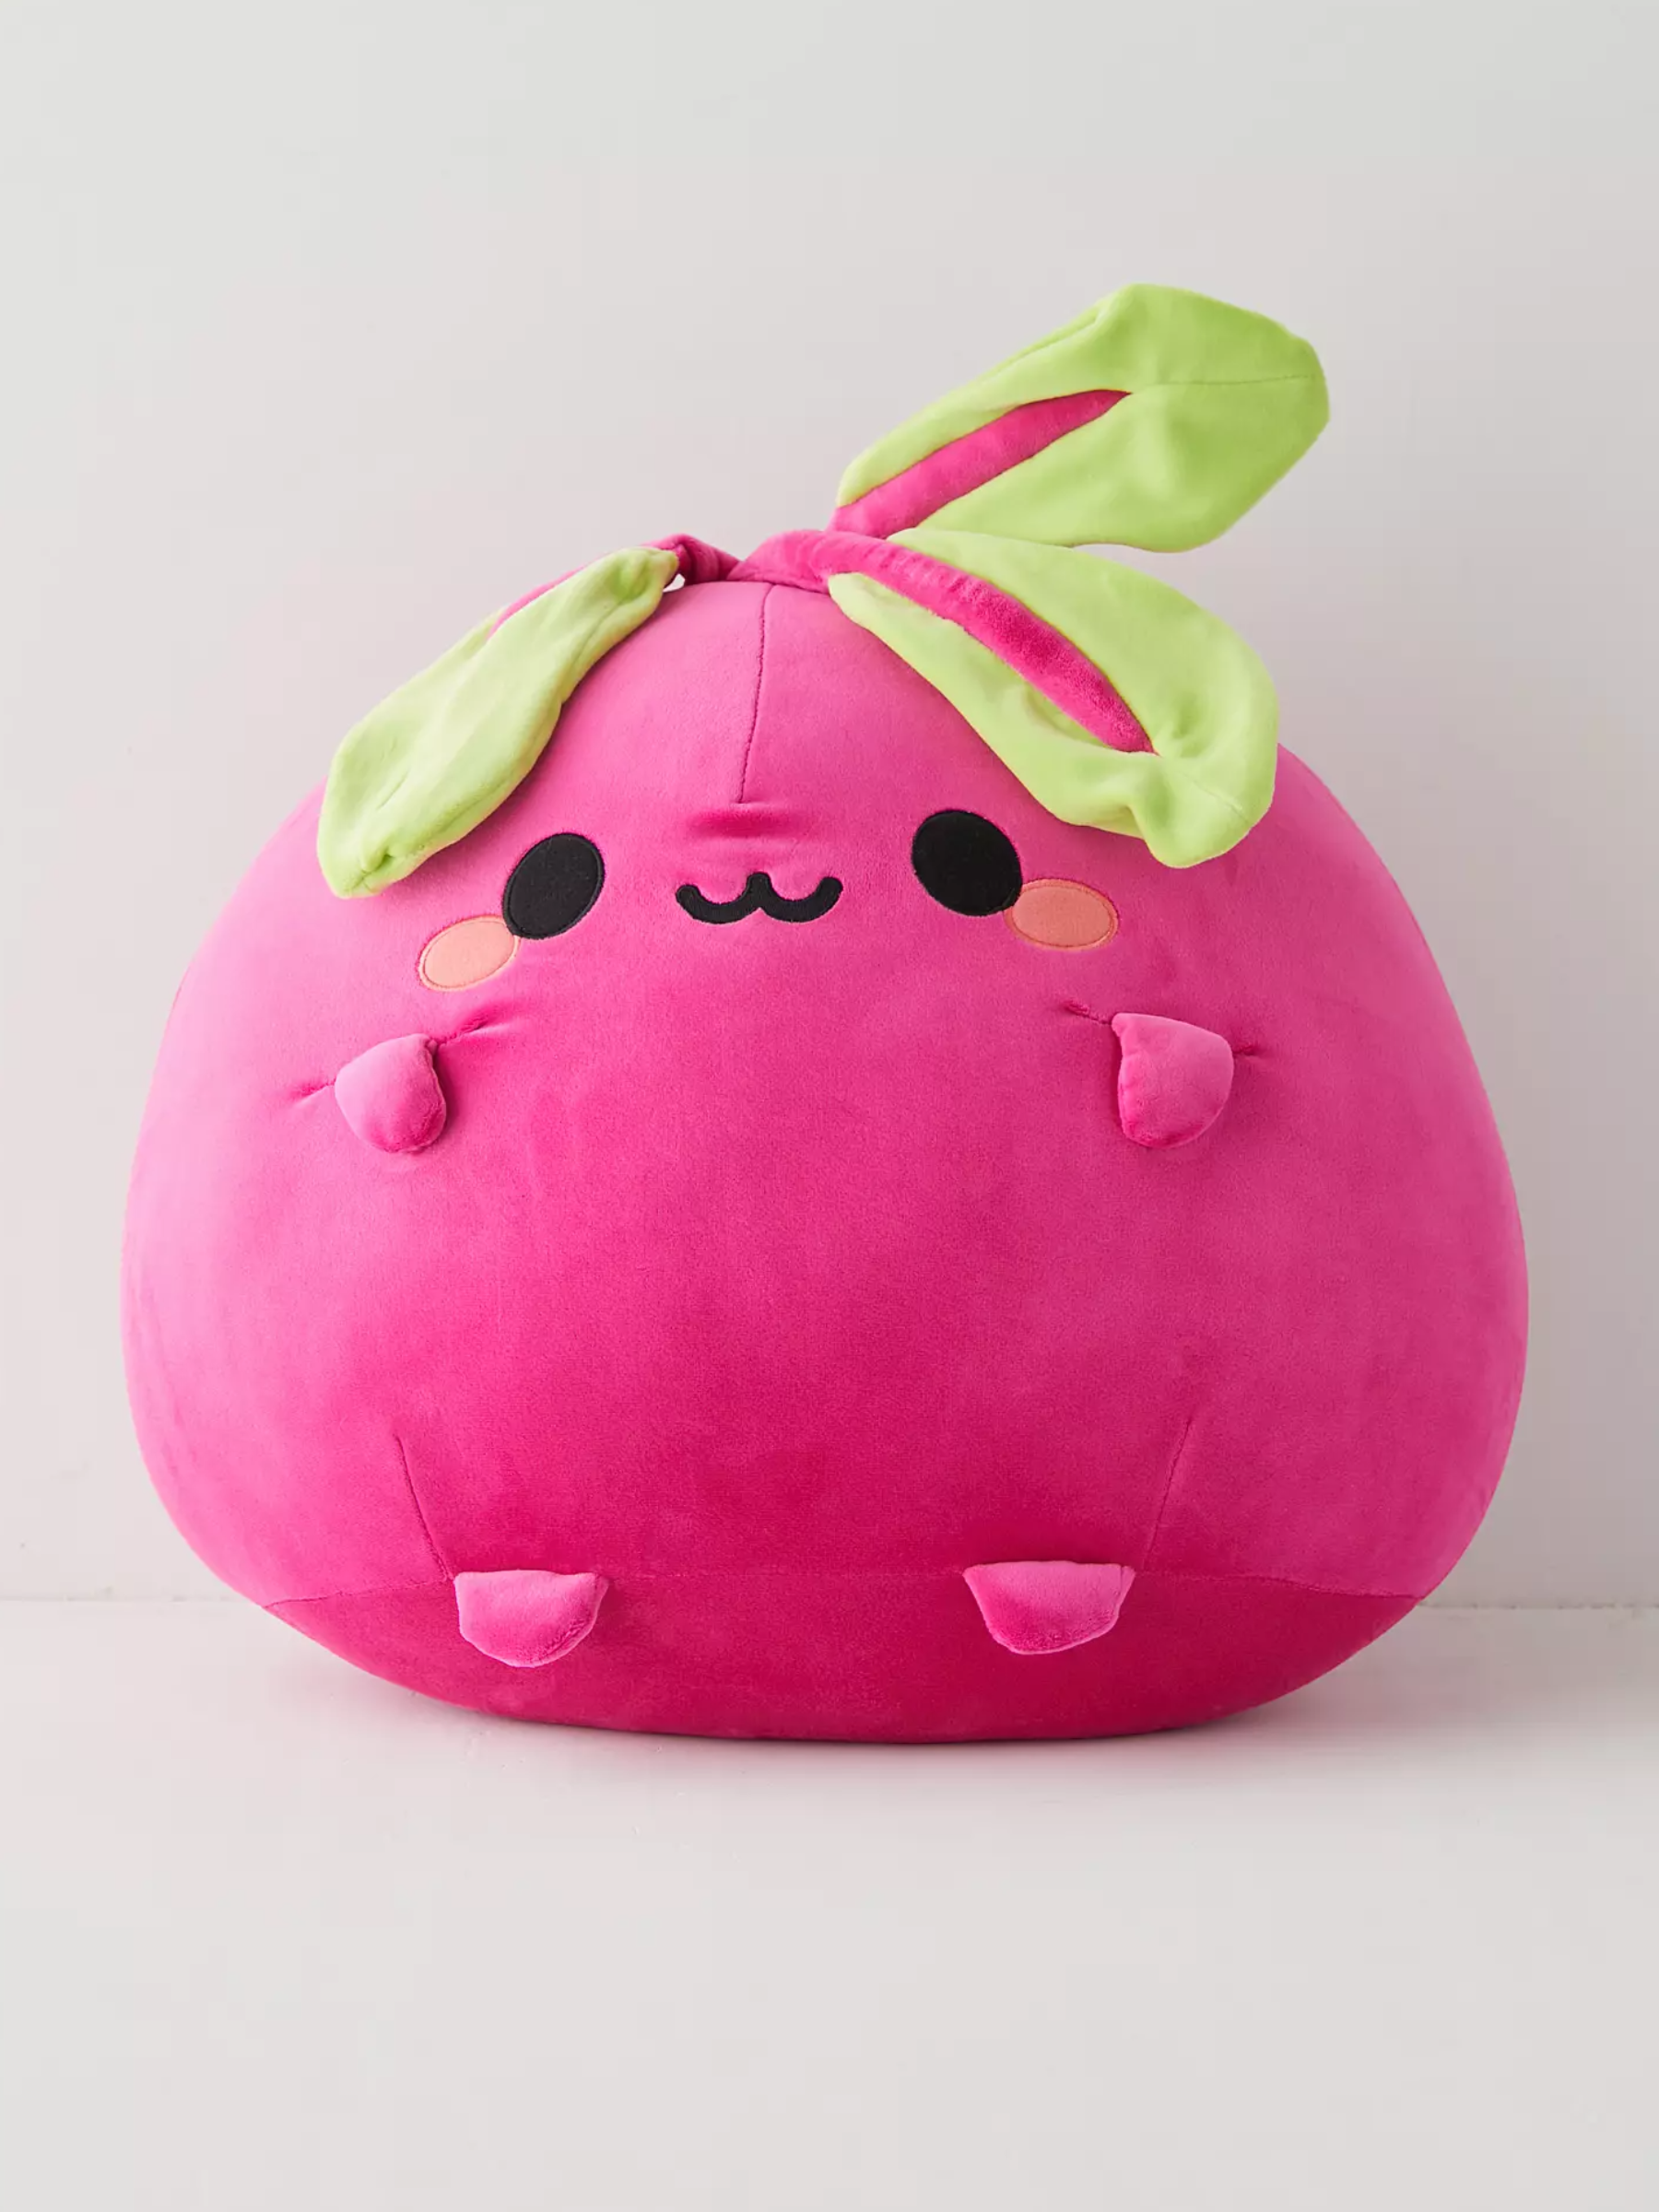 Cuddly, cute, and a perfect addition to any teen's dorm or room decor. $45, Urban Outfitters. <a href="https://www.urbanoutfitters.com/shop/smoko-beet-mochi-plushie?">Get it now!</a><p>Sign up for today’s biggest stories, from pop culture to politics.</p><a href="https://www.glamour.com/newsletter/news?sourceCode=msnsend">Sign Up</a>